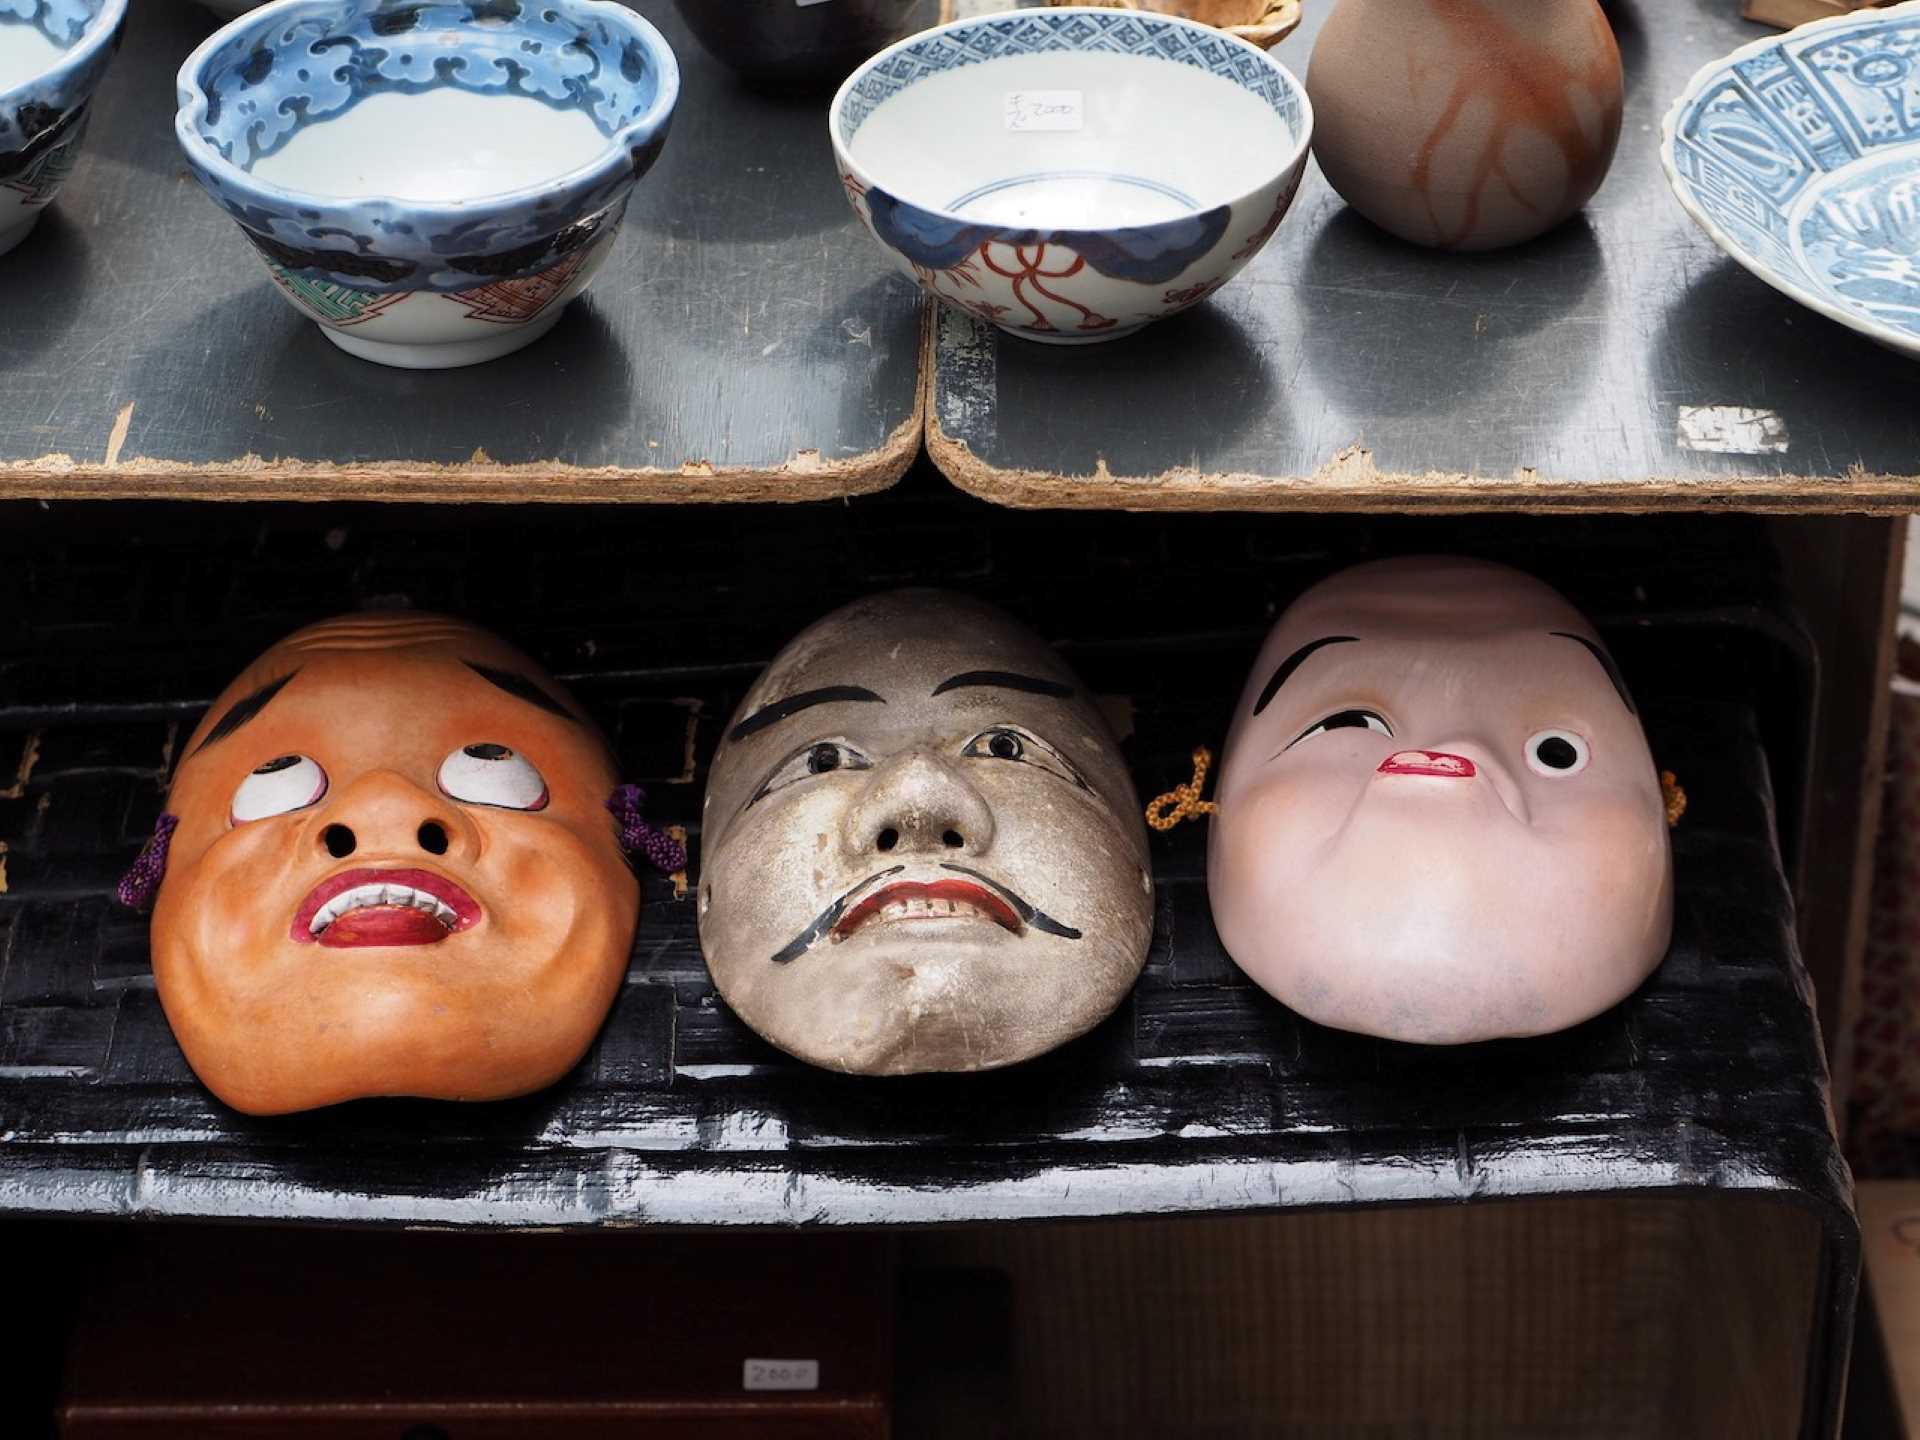 A Guide to Flea and Antique Markets in Japan